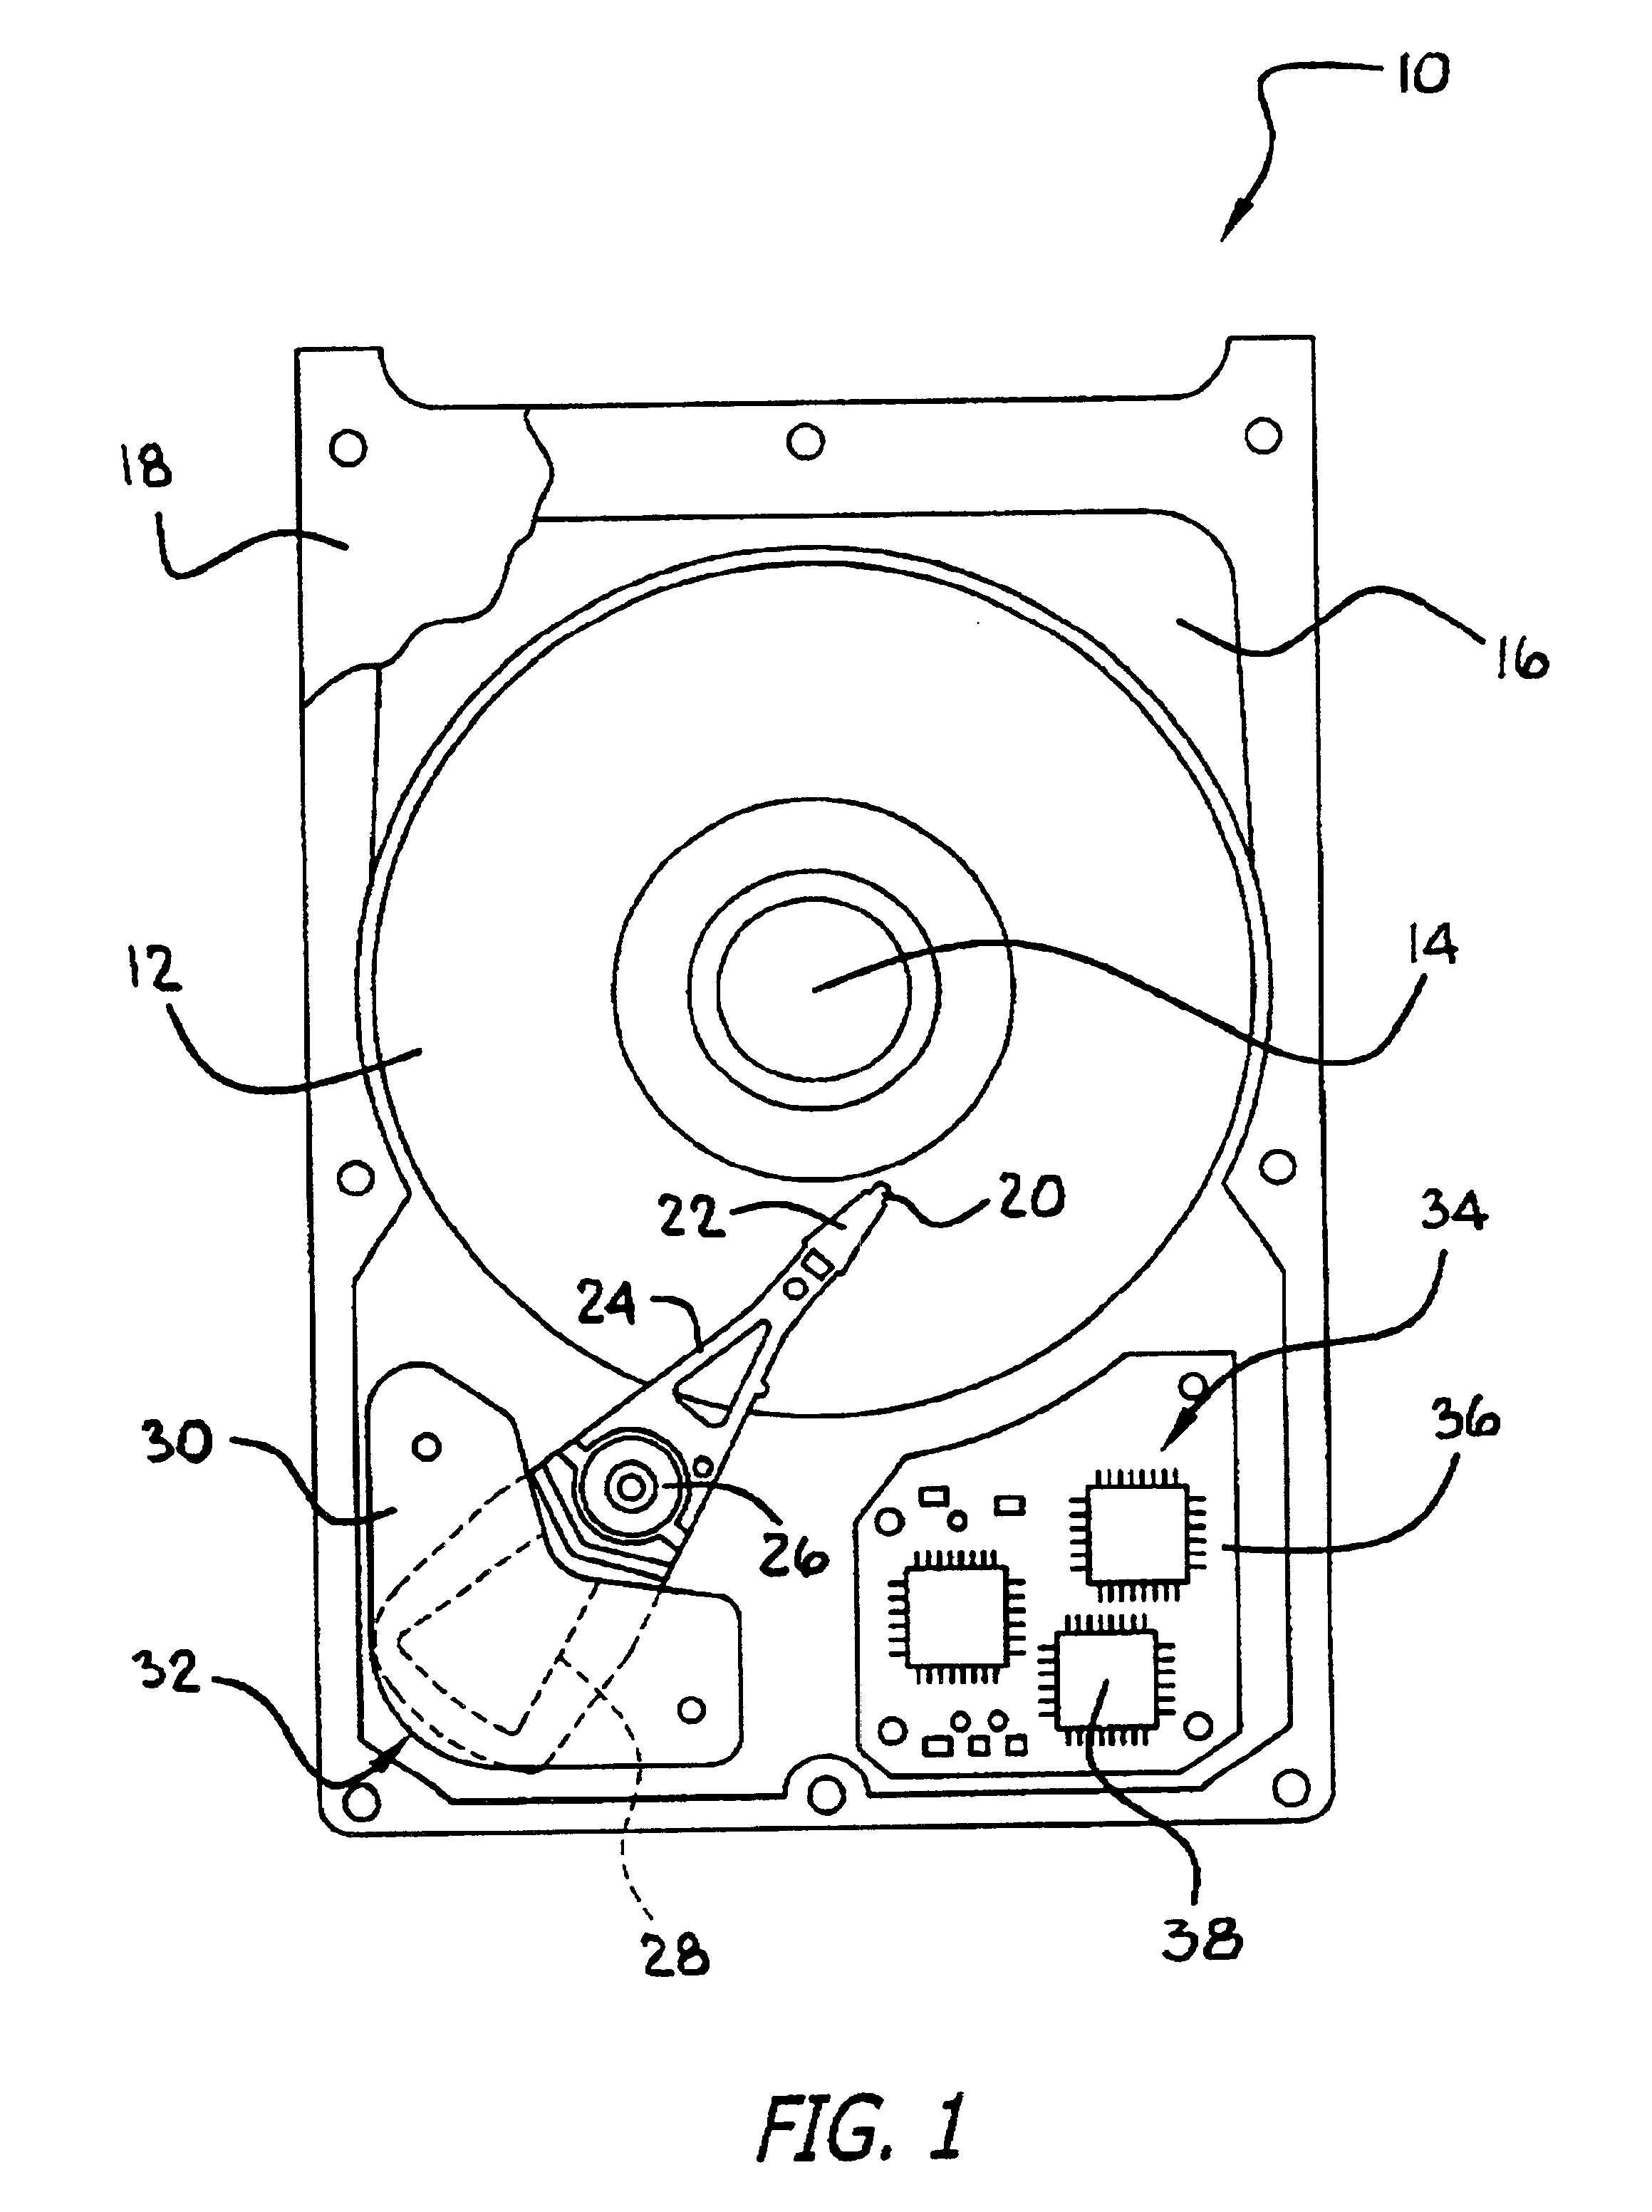 Wave stringer for controlling acoustic noise and shock vibration in a storage device